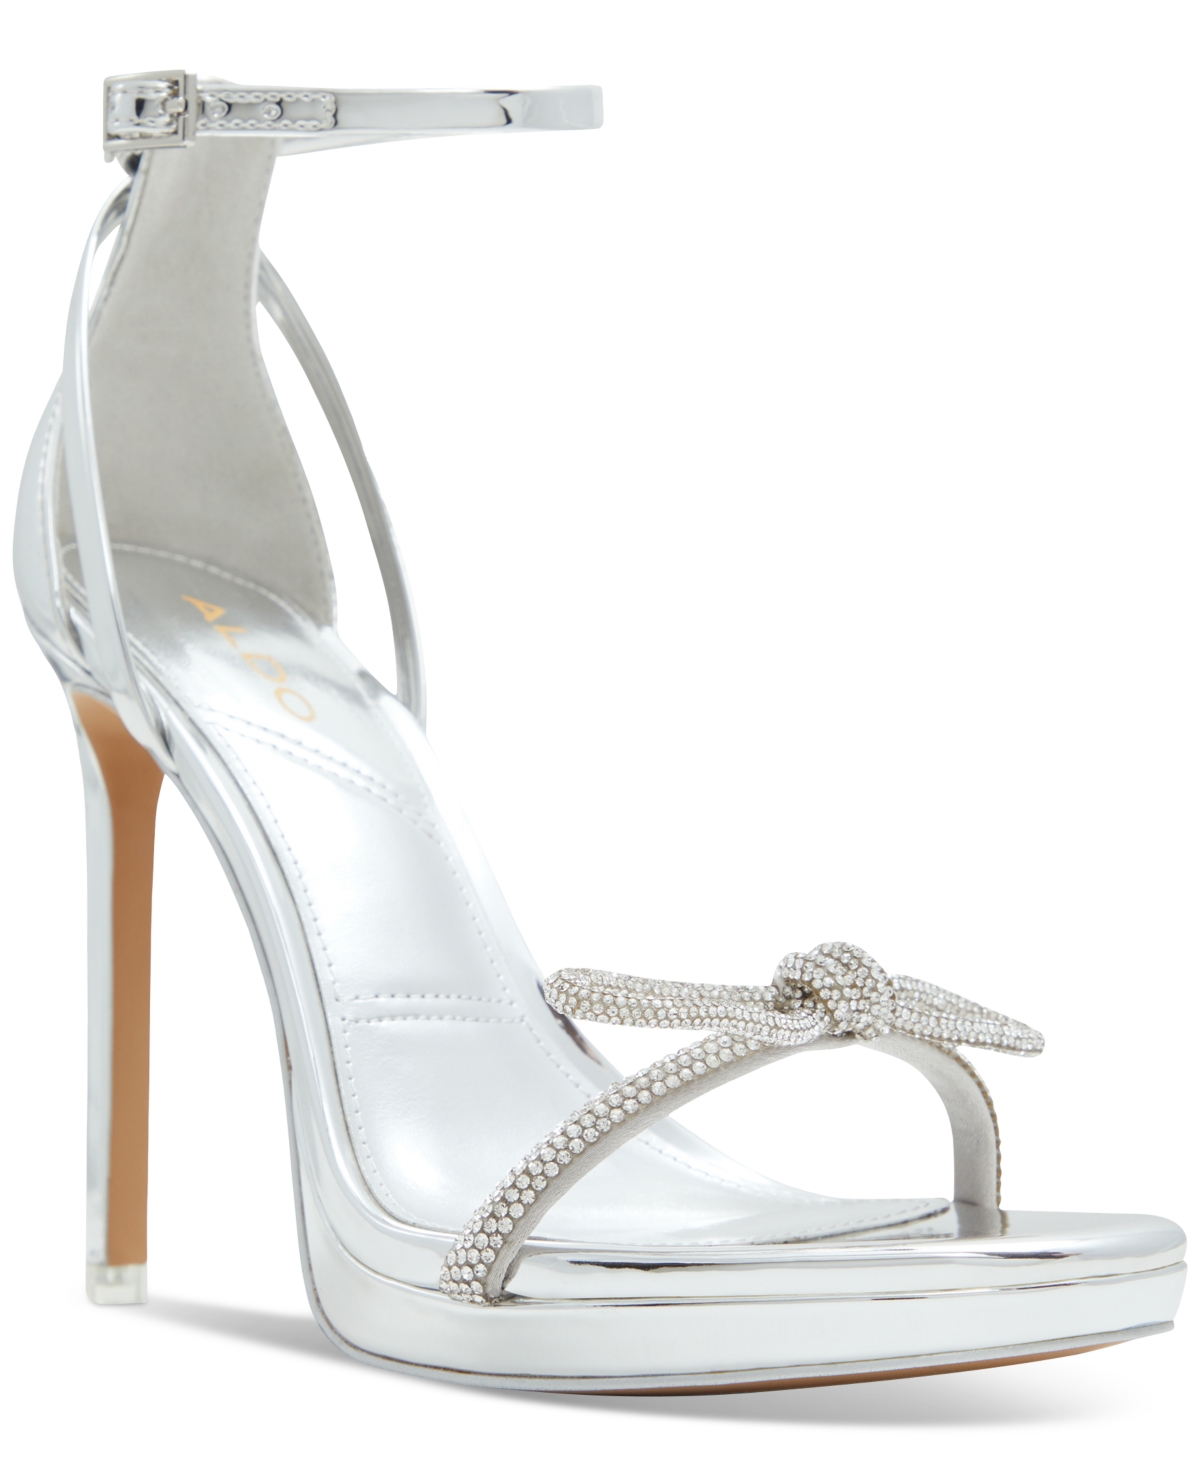 Women's Serene Bow Ankle-Strap Bow Dress Sandals - White Smooth